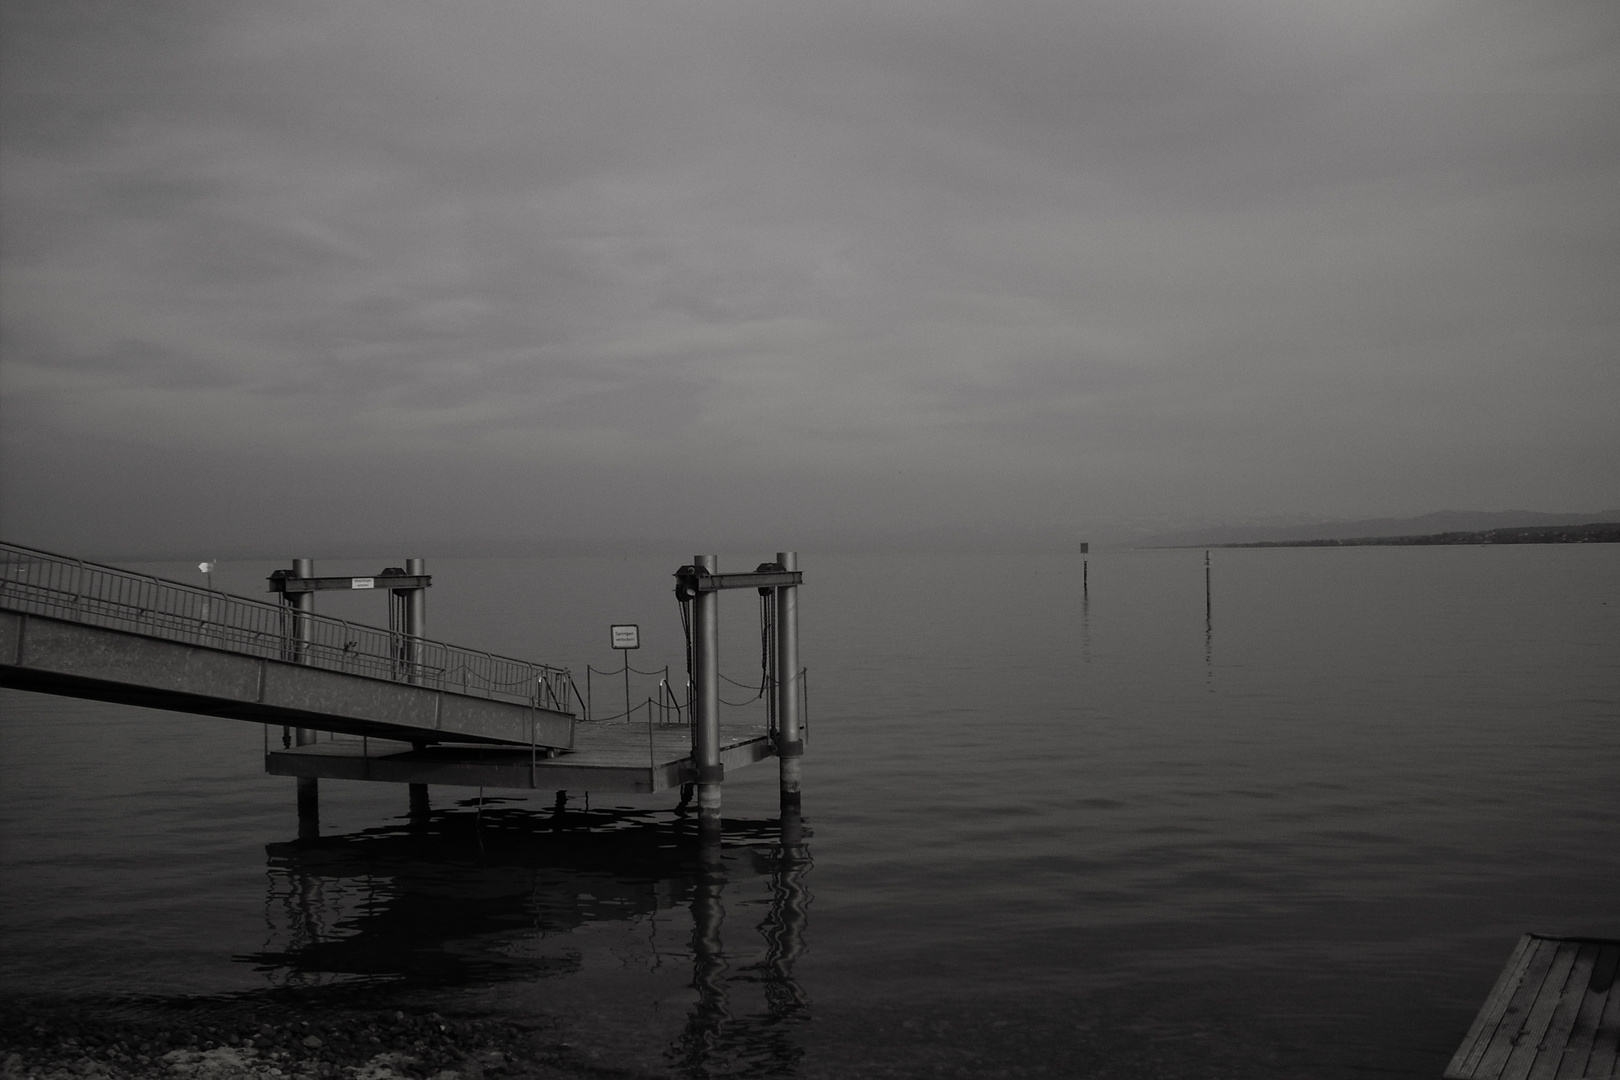 Lake of Constance